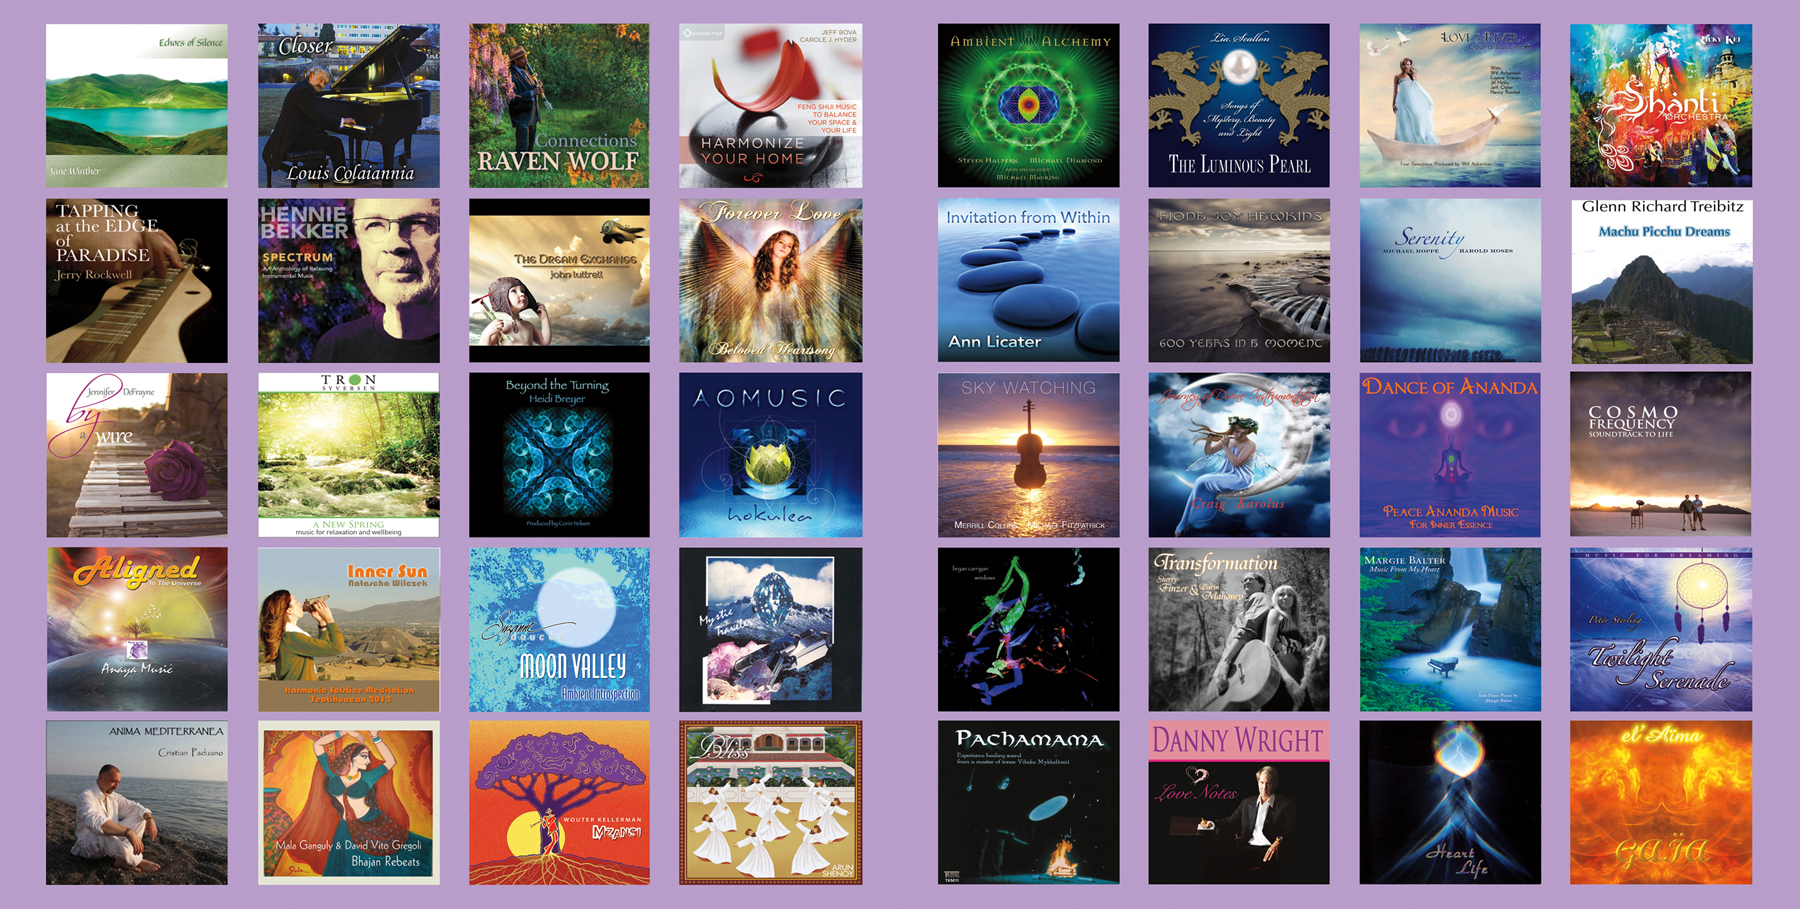 SFTC VI insert: Covers of albums from 40 participating artists are a colorful representation of New Age music today.